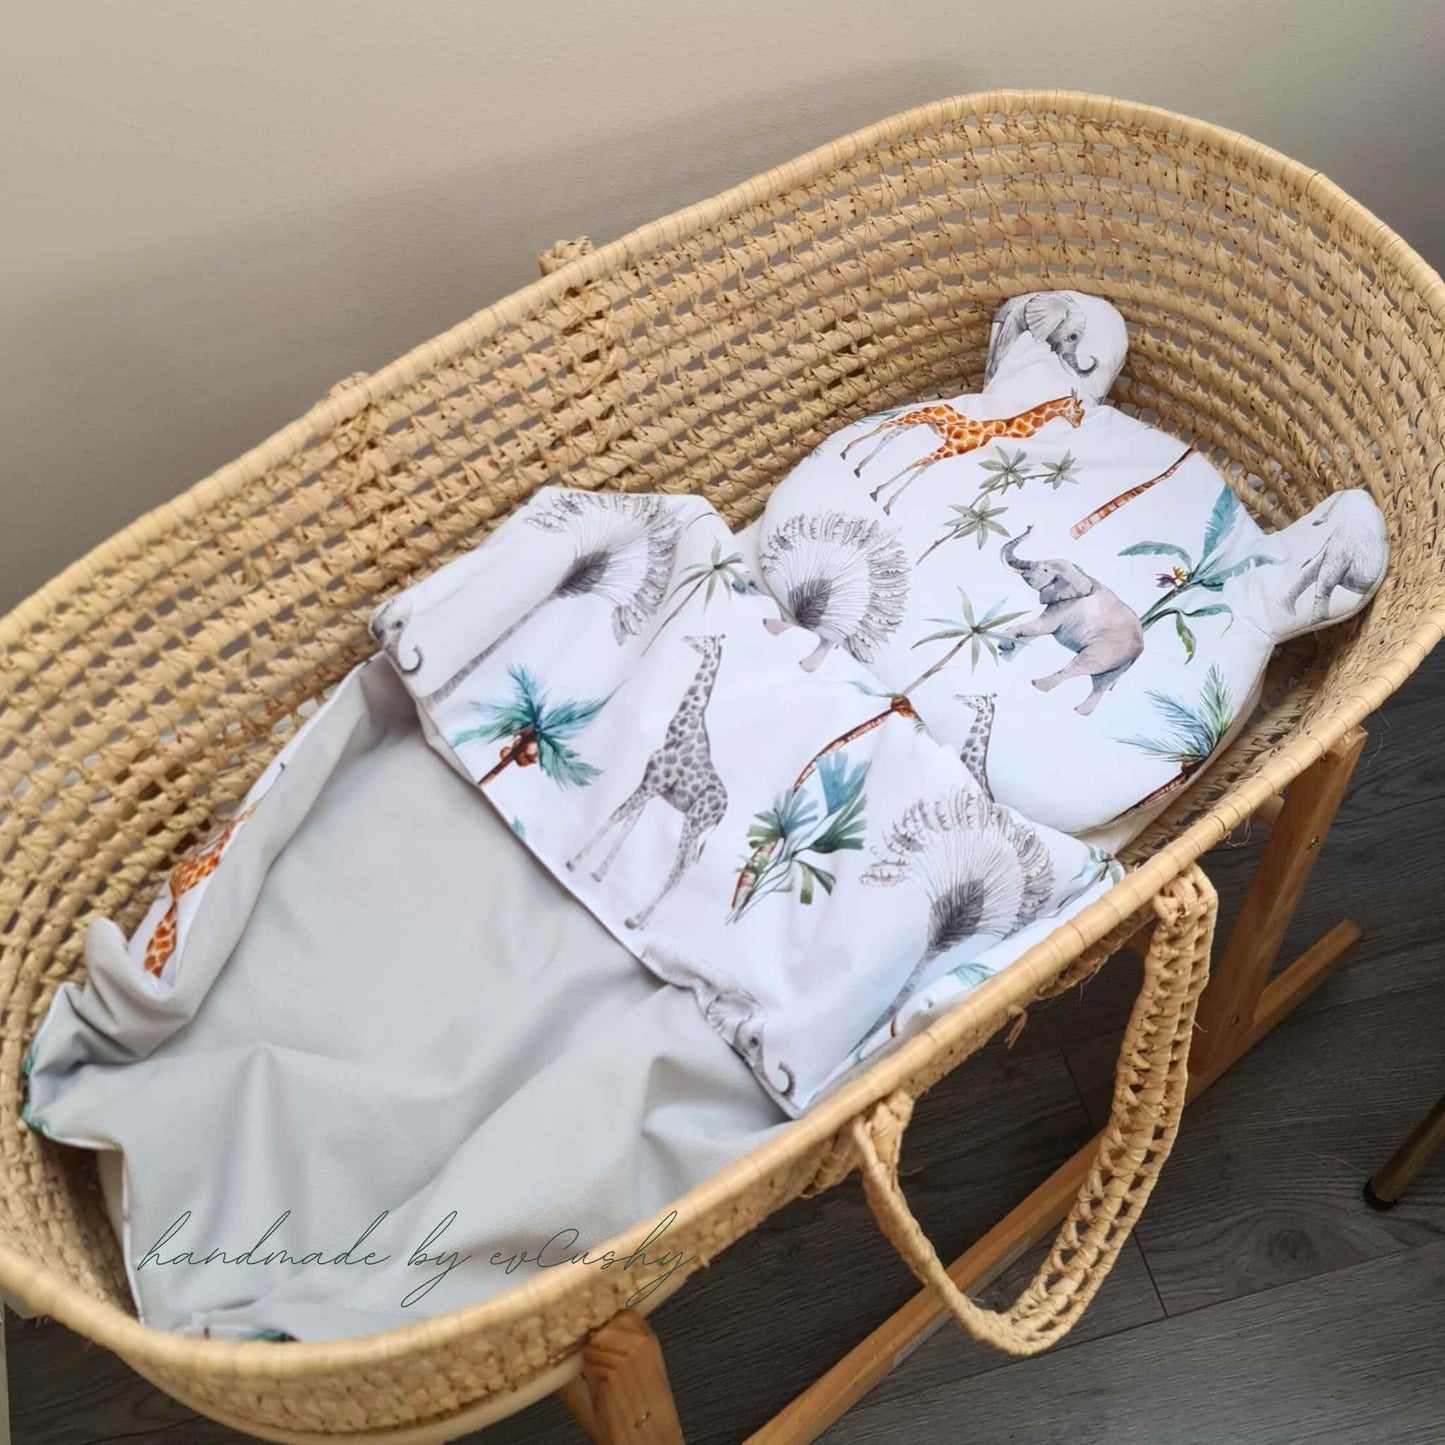 baby bedding set quilt and pillow for crib moses basket carry cot grey velvet and safari pattern cotton evcushy newborn bundle